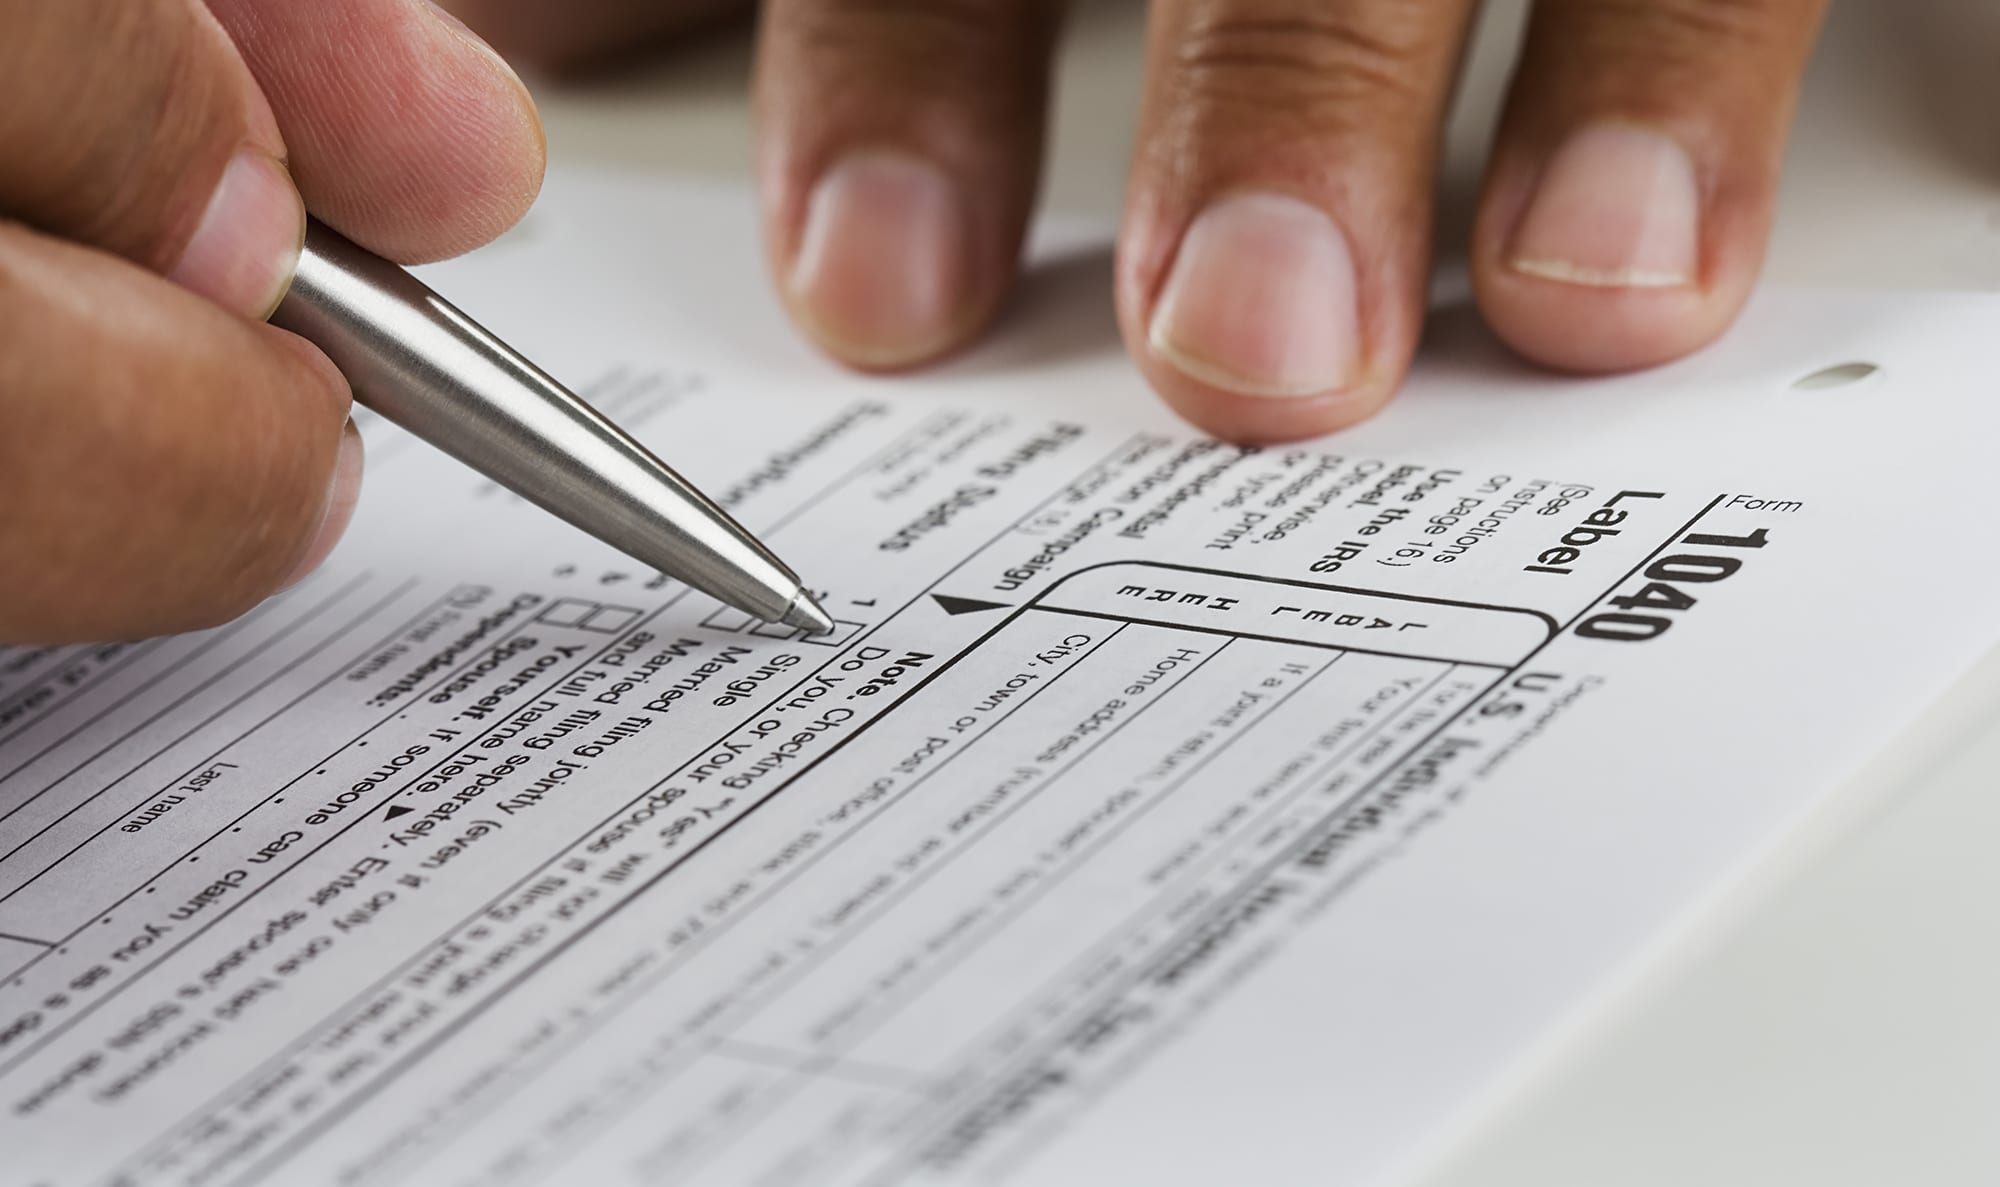 Research shows that pre-filed tax returns may be possible